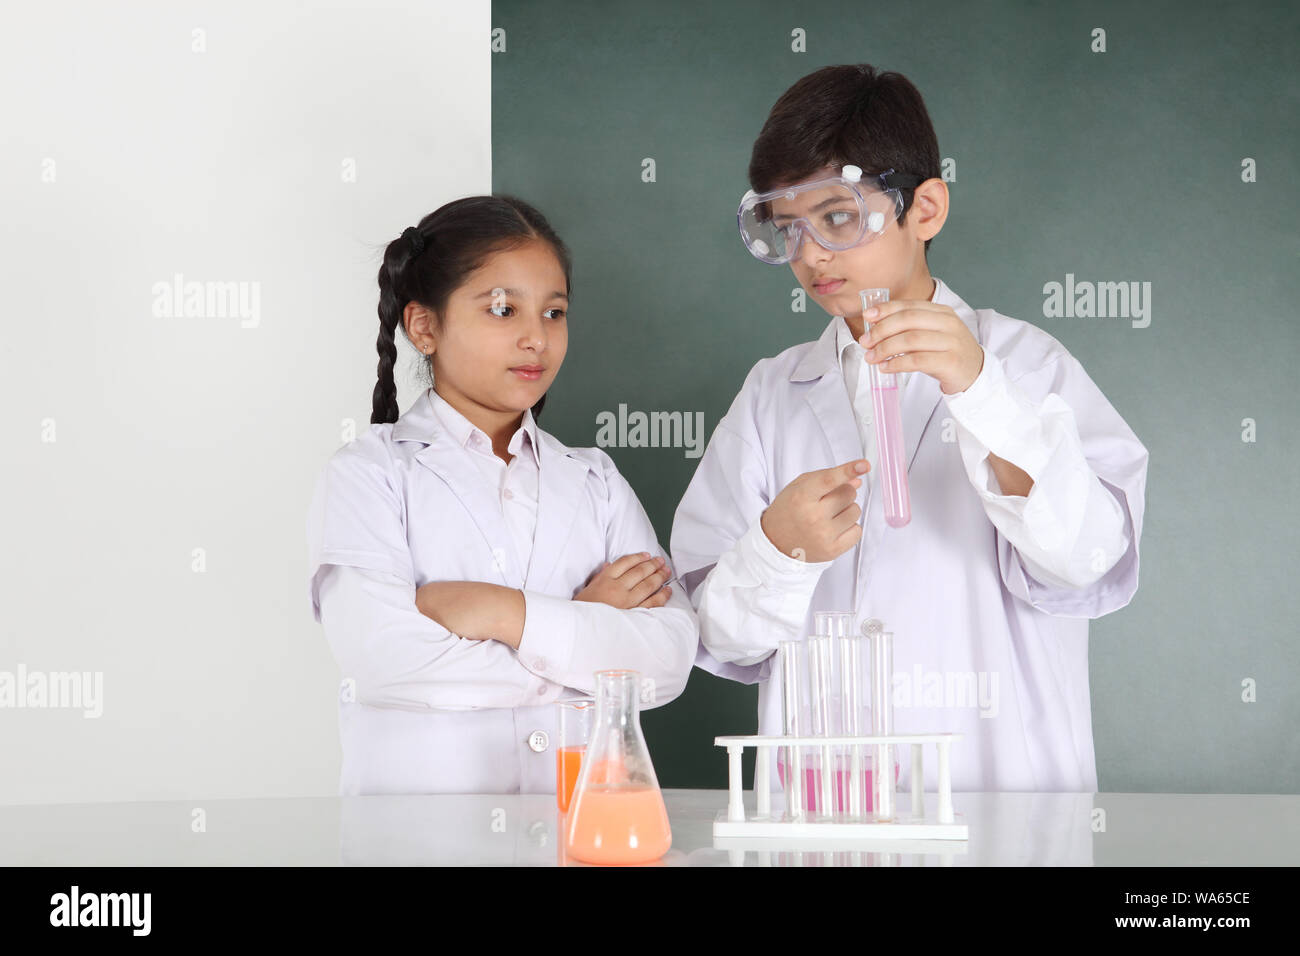 School students experimenting in a chemistry lab Stock Photo